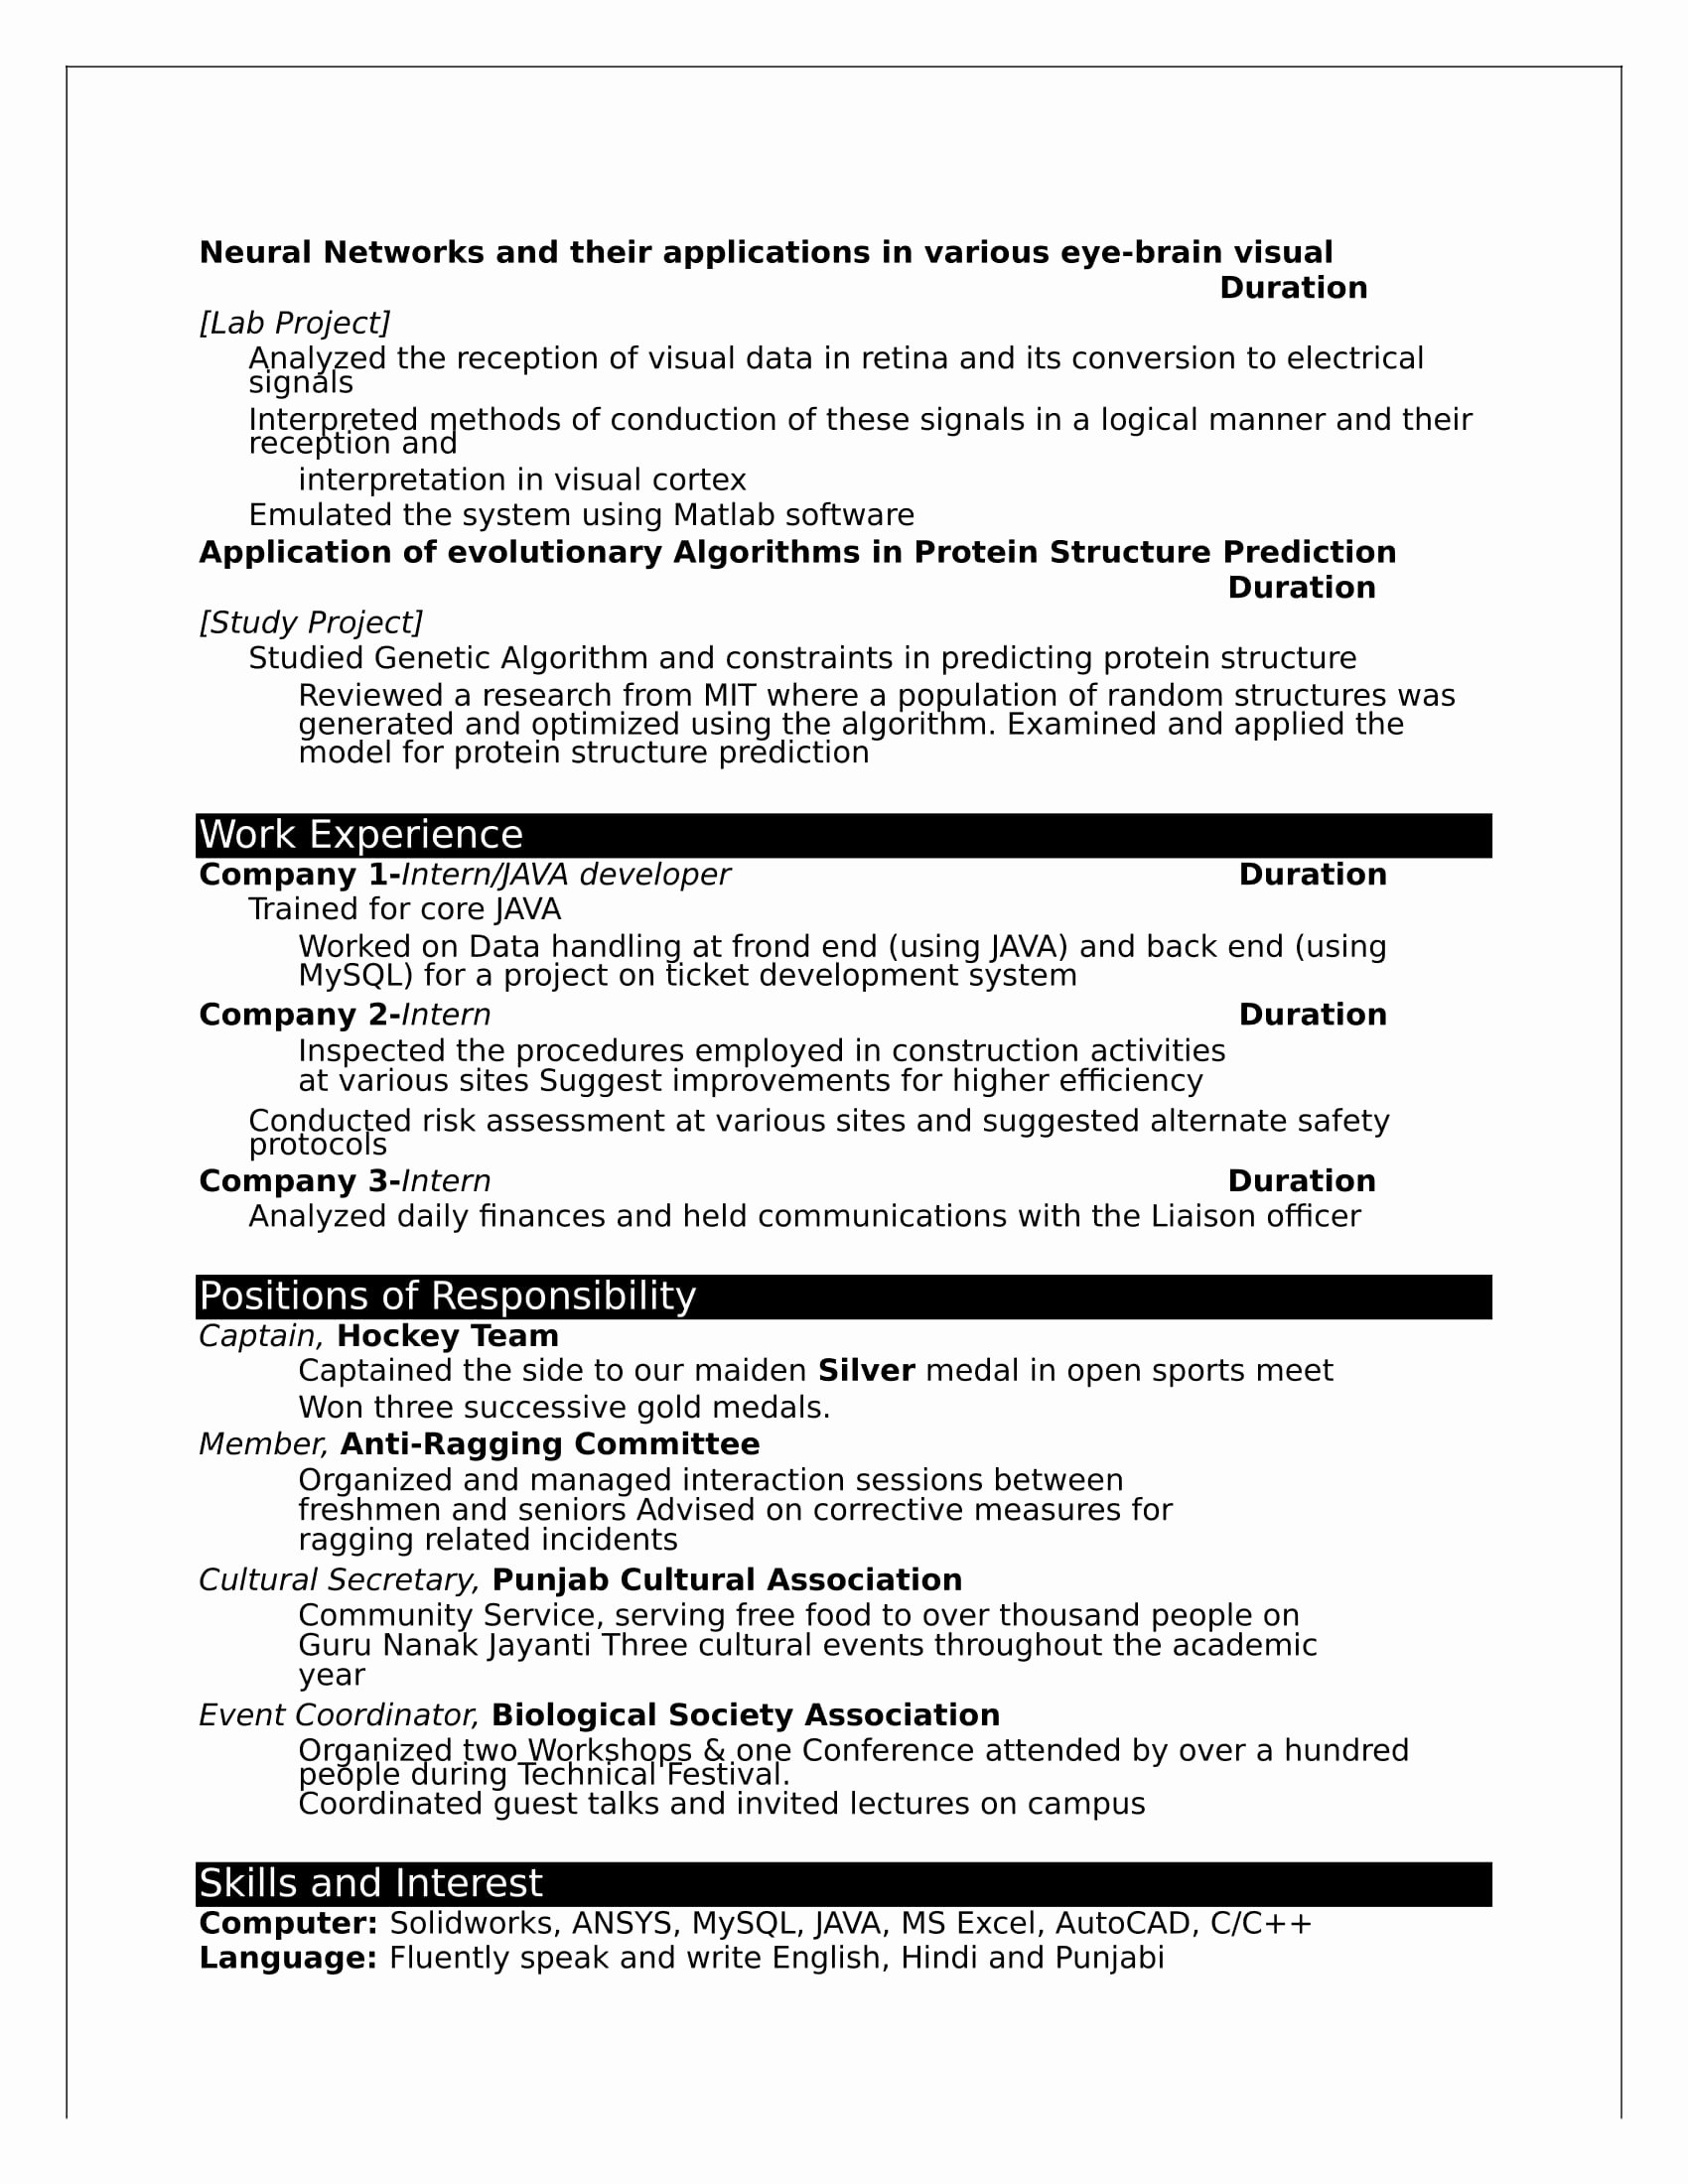 Resume format for Freshers Elegant 32 Resume Templates for Freshers Download Free Word format